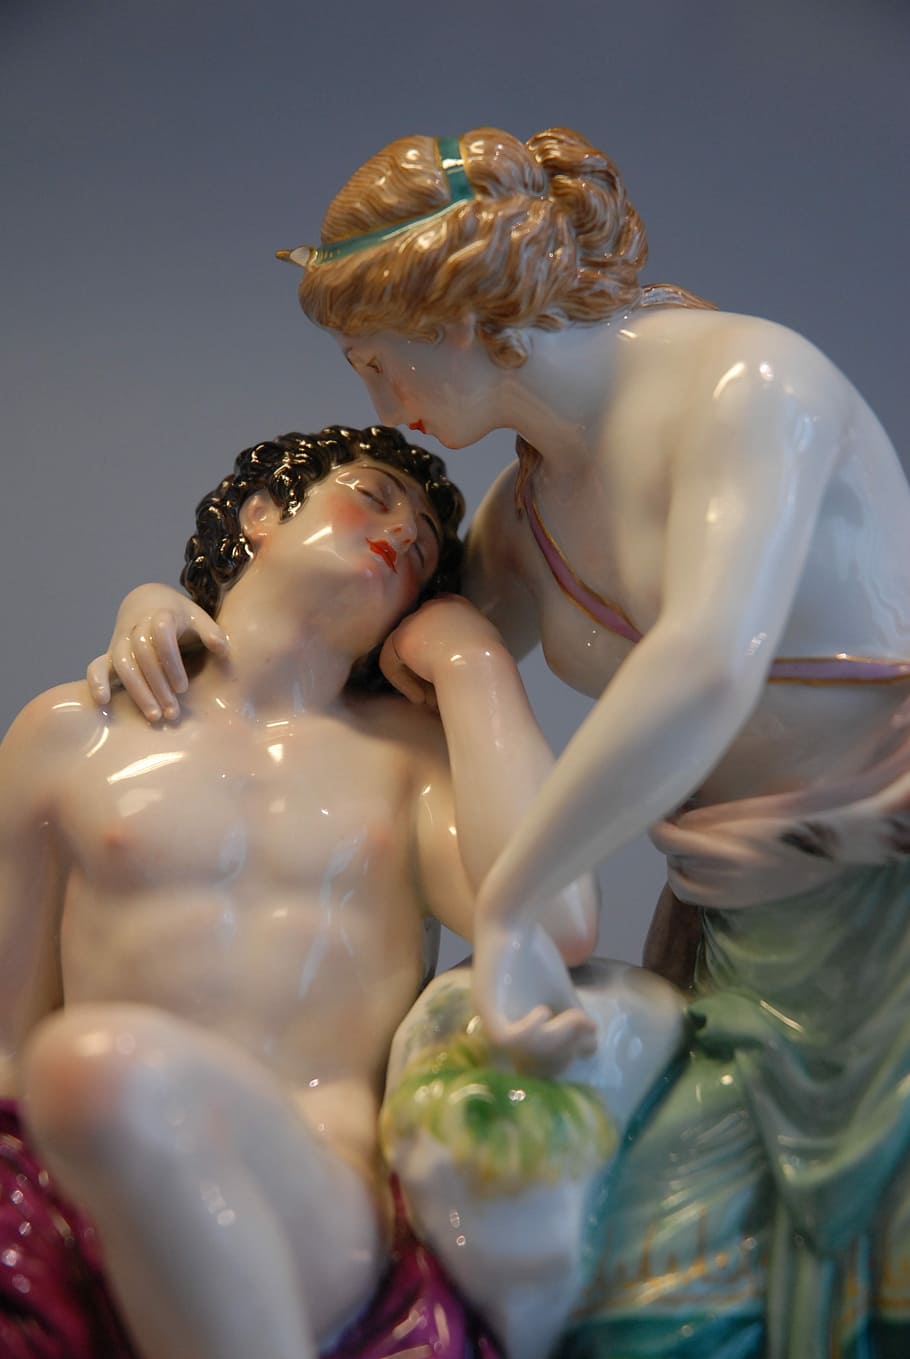 Love, Porcelain, Lovers, china figures, tenderness, shirtless, adult, togetherness, two people, adults only